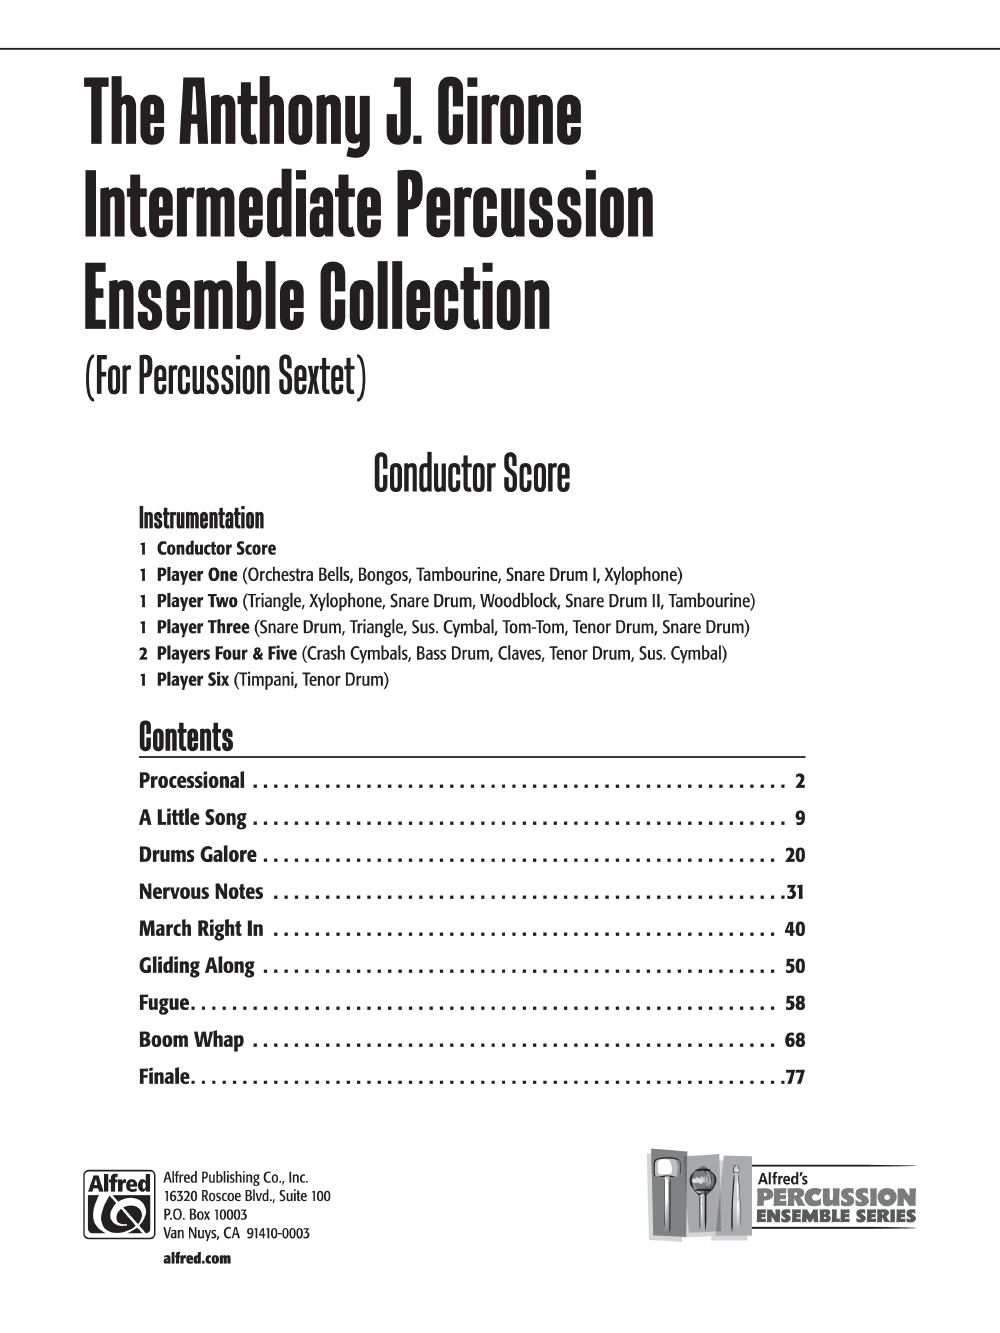 For Percussion Sextet Drums Galore 